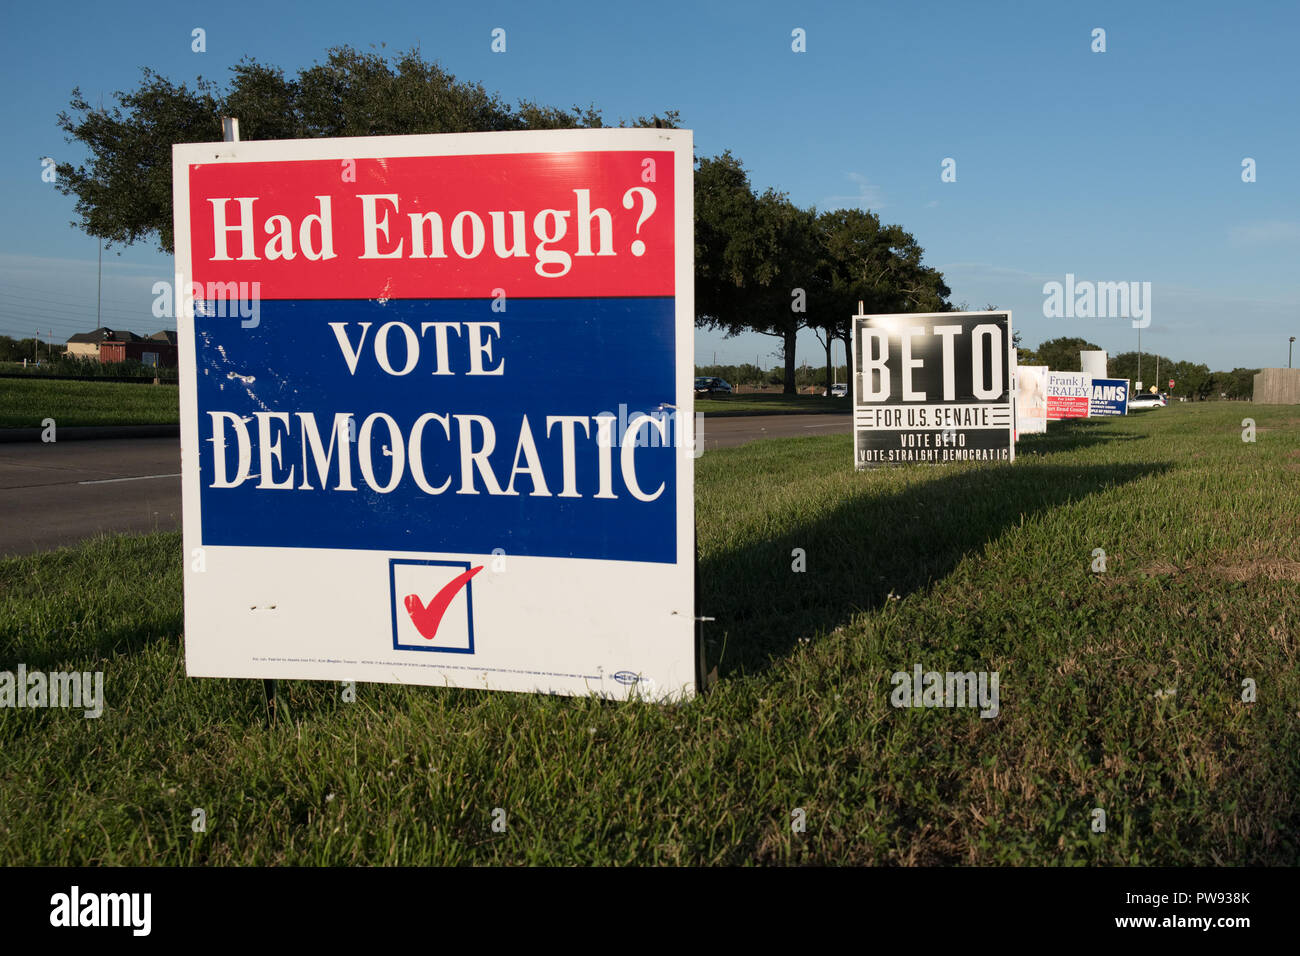 Missouri City, Texas - October 13, 2018: Vote Democratic and Beto O'Rourke election signs are seen in many residential areas in Texas. Credit: michelmond/Alamy Live News Stock Photo